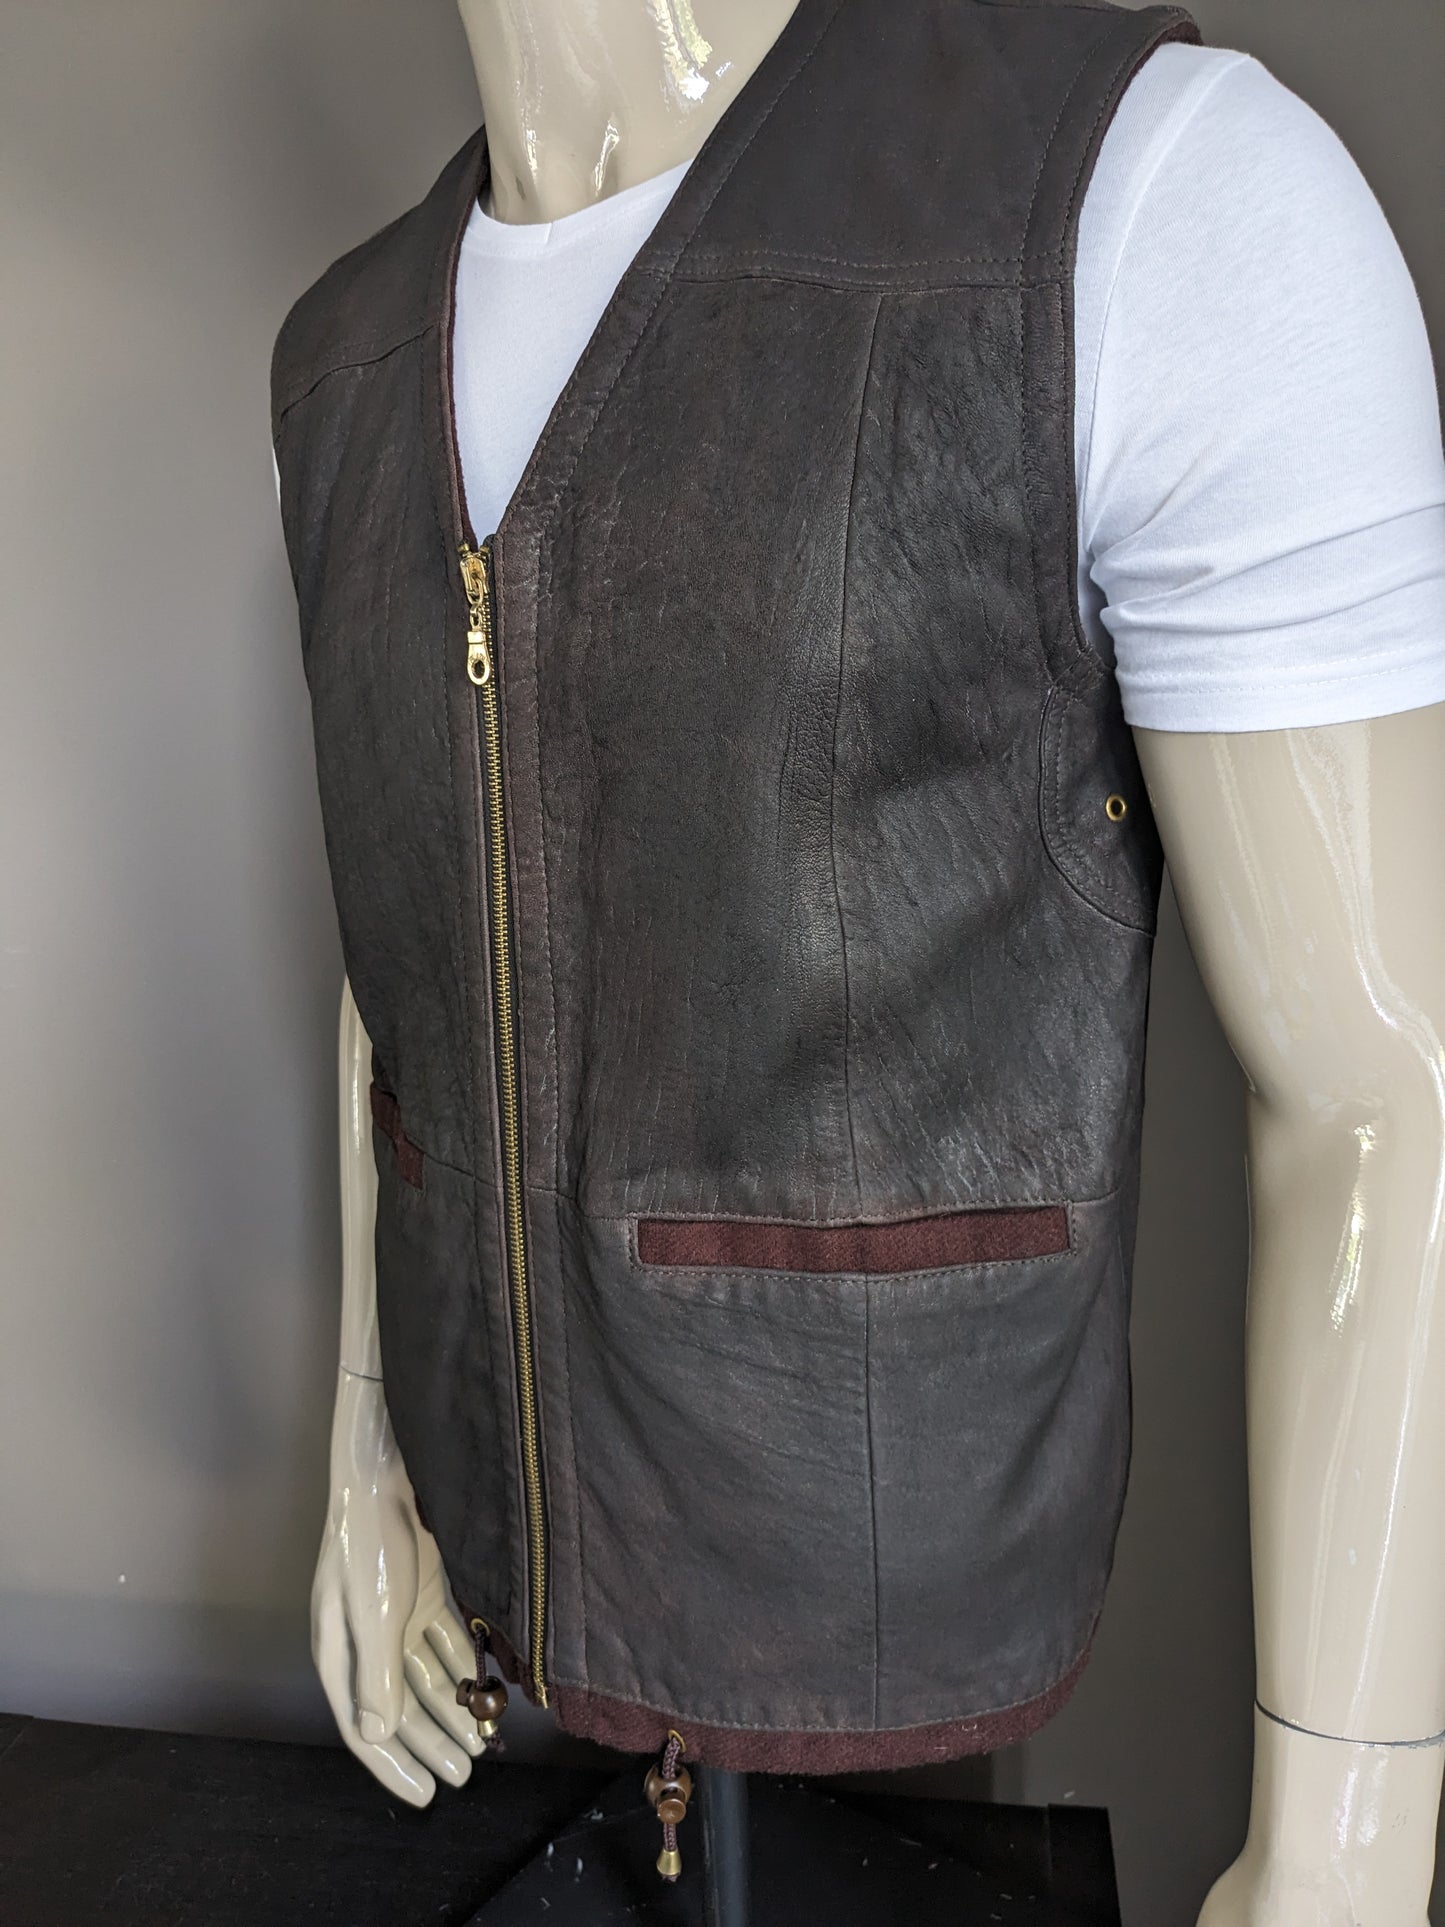 Cihander lamb leather waistcoat / body warmer with zipper. Double -sided leather. Dark brown colored. Size L.